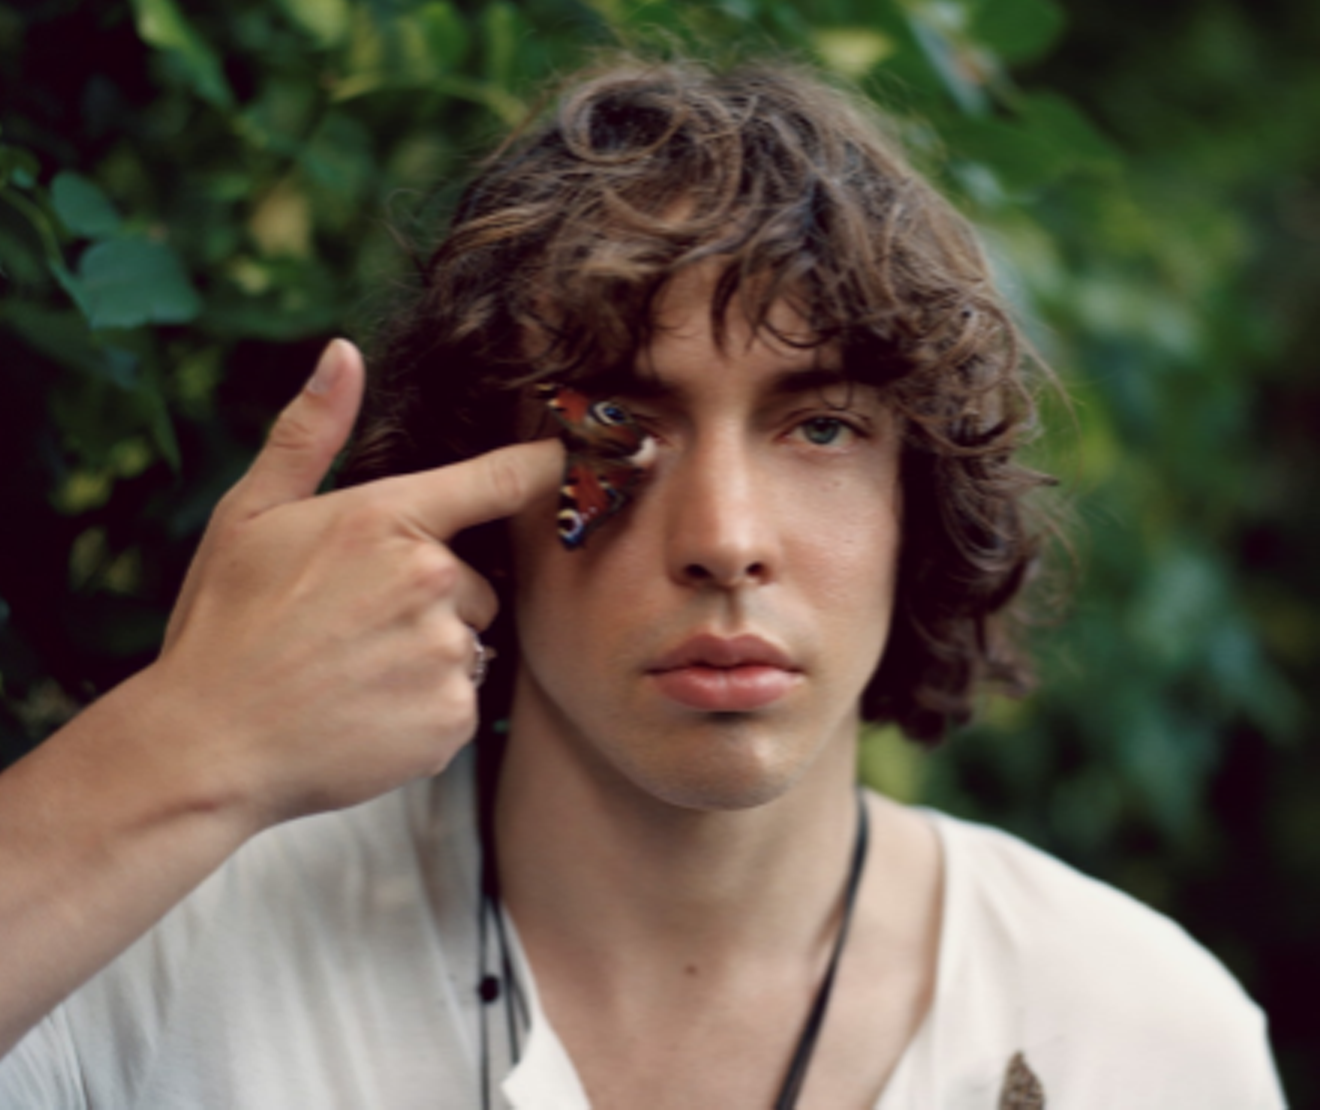 Barns Courtney is thankful for fans who show up even when he's the smaller name on the marquee.